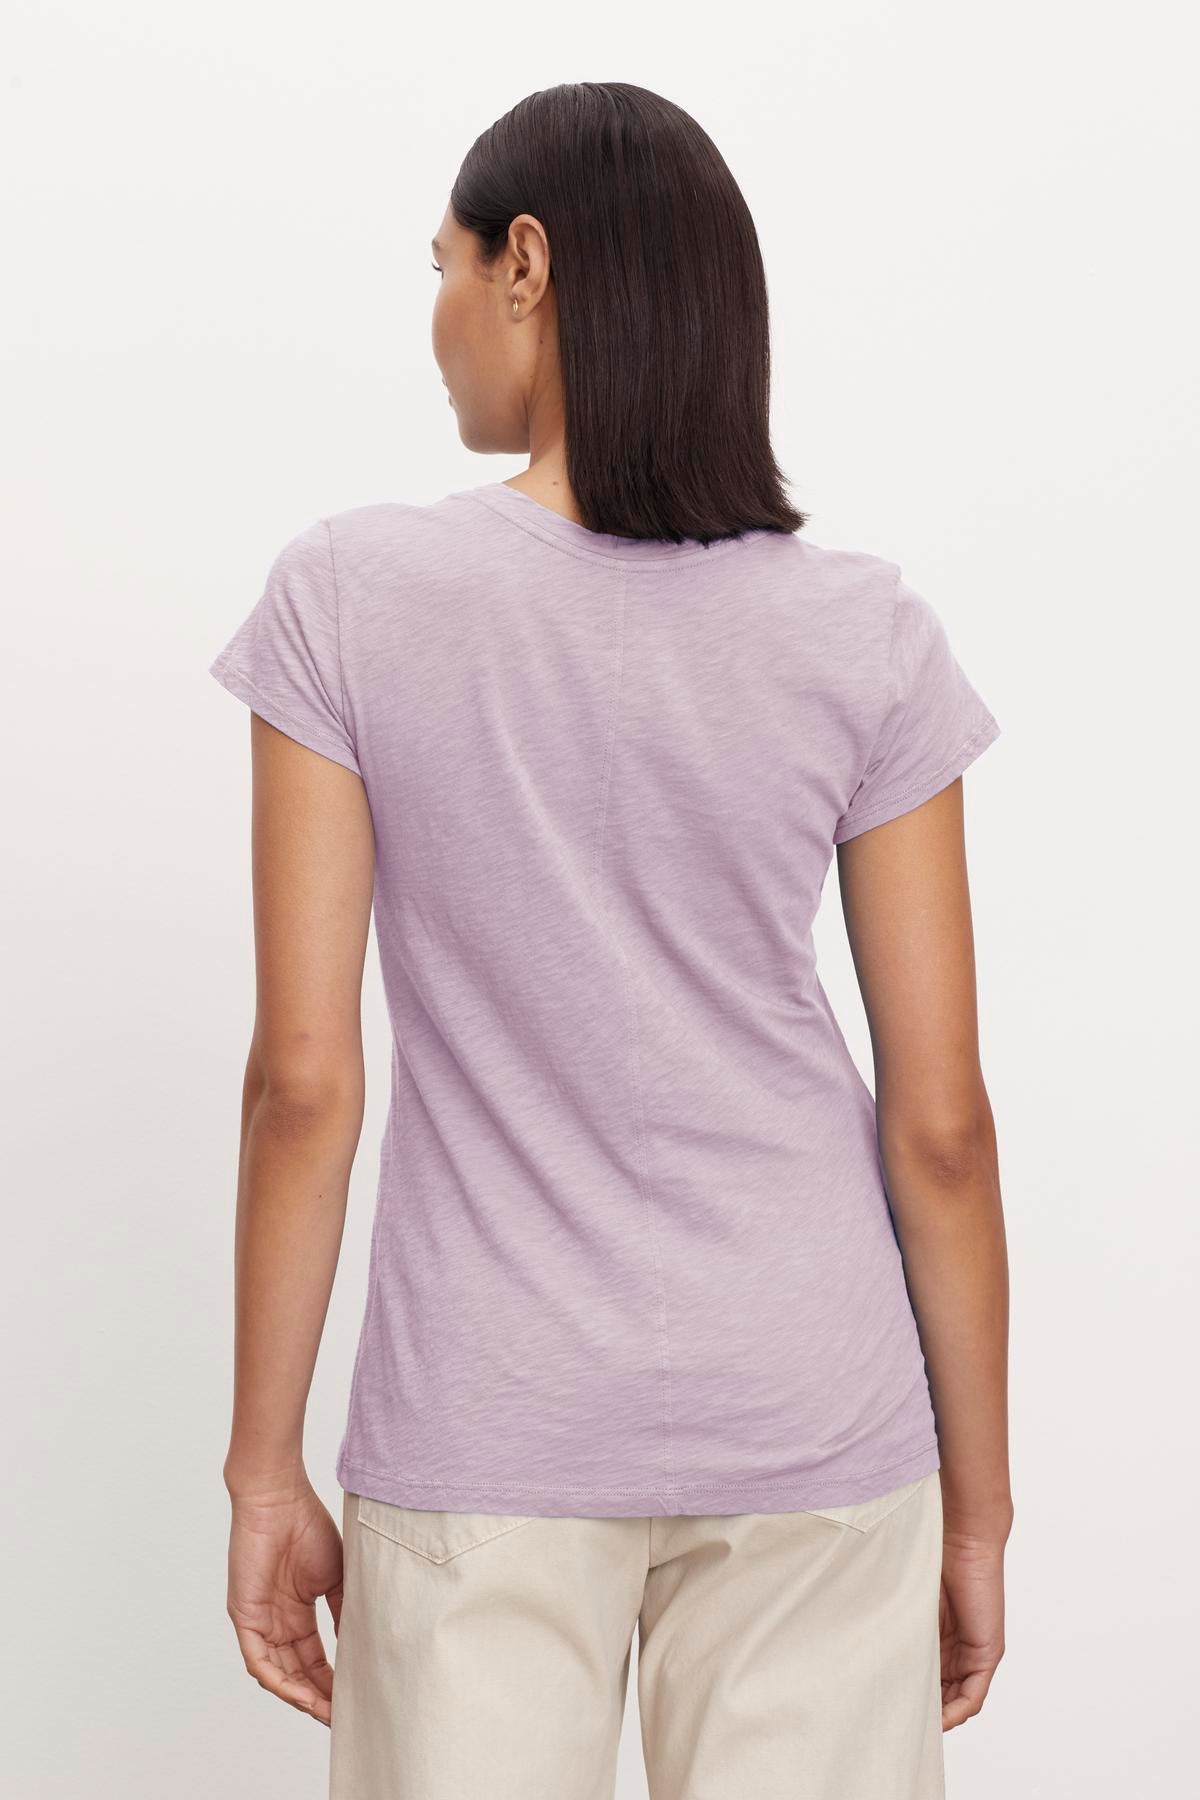   A person with short, dark hair stands facing away, wearing a light purple ODELIA TEE by Velvet by Graham & Spencer with a classic crew neckline and beige pants against a plain white background. The t-shirt is made from premium cotton, making it a wardrobe essential. 